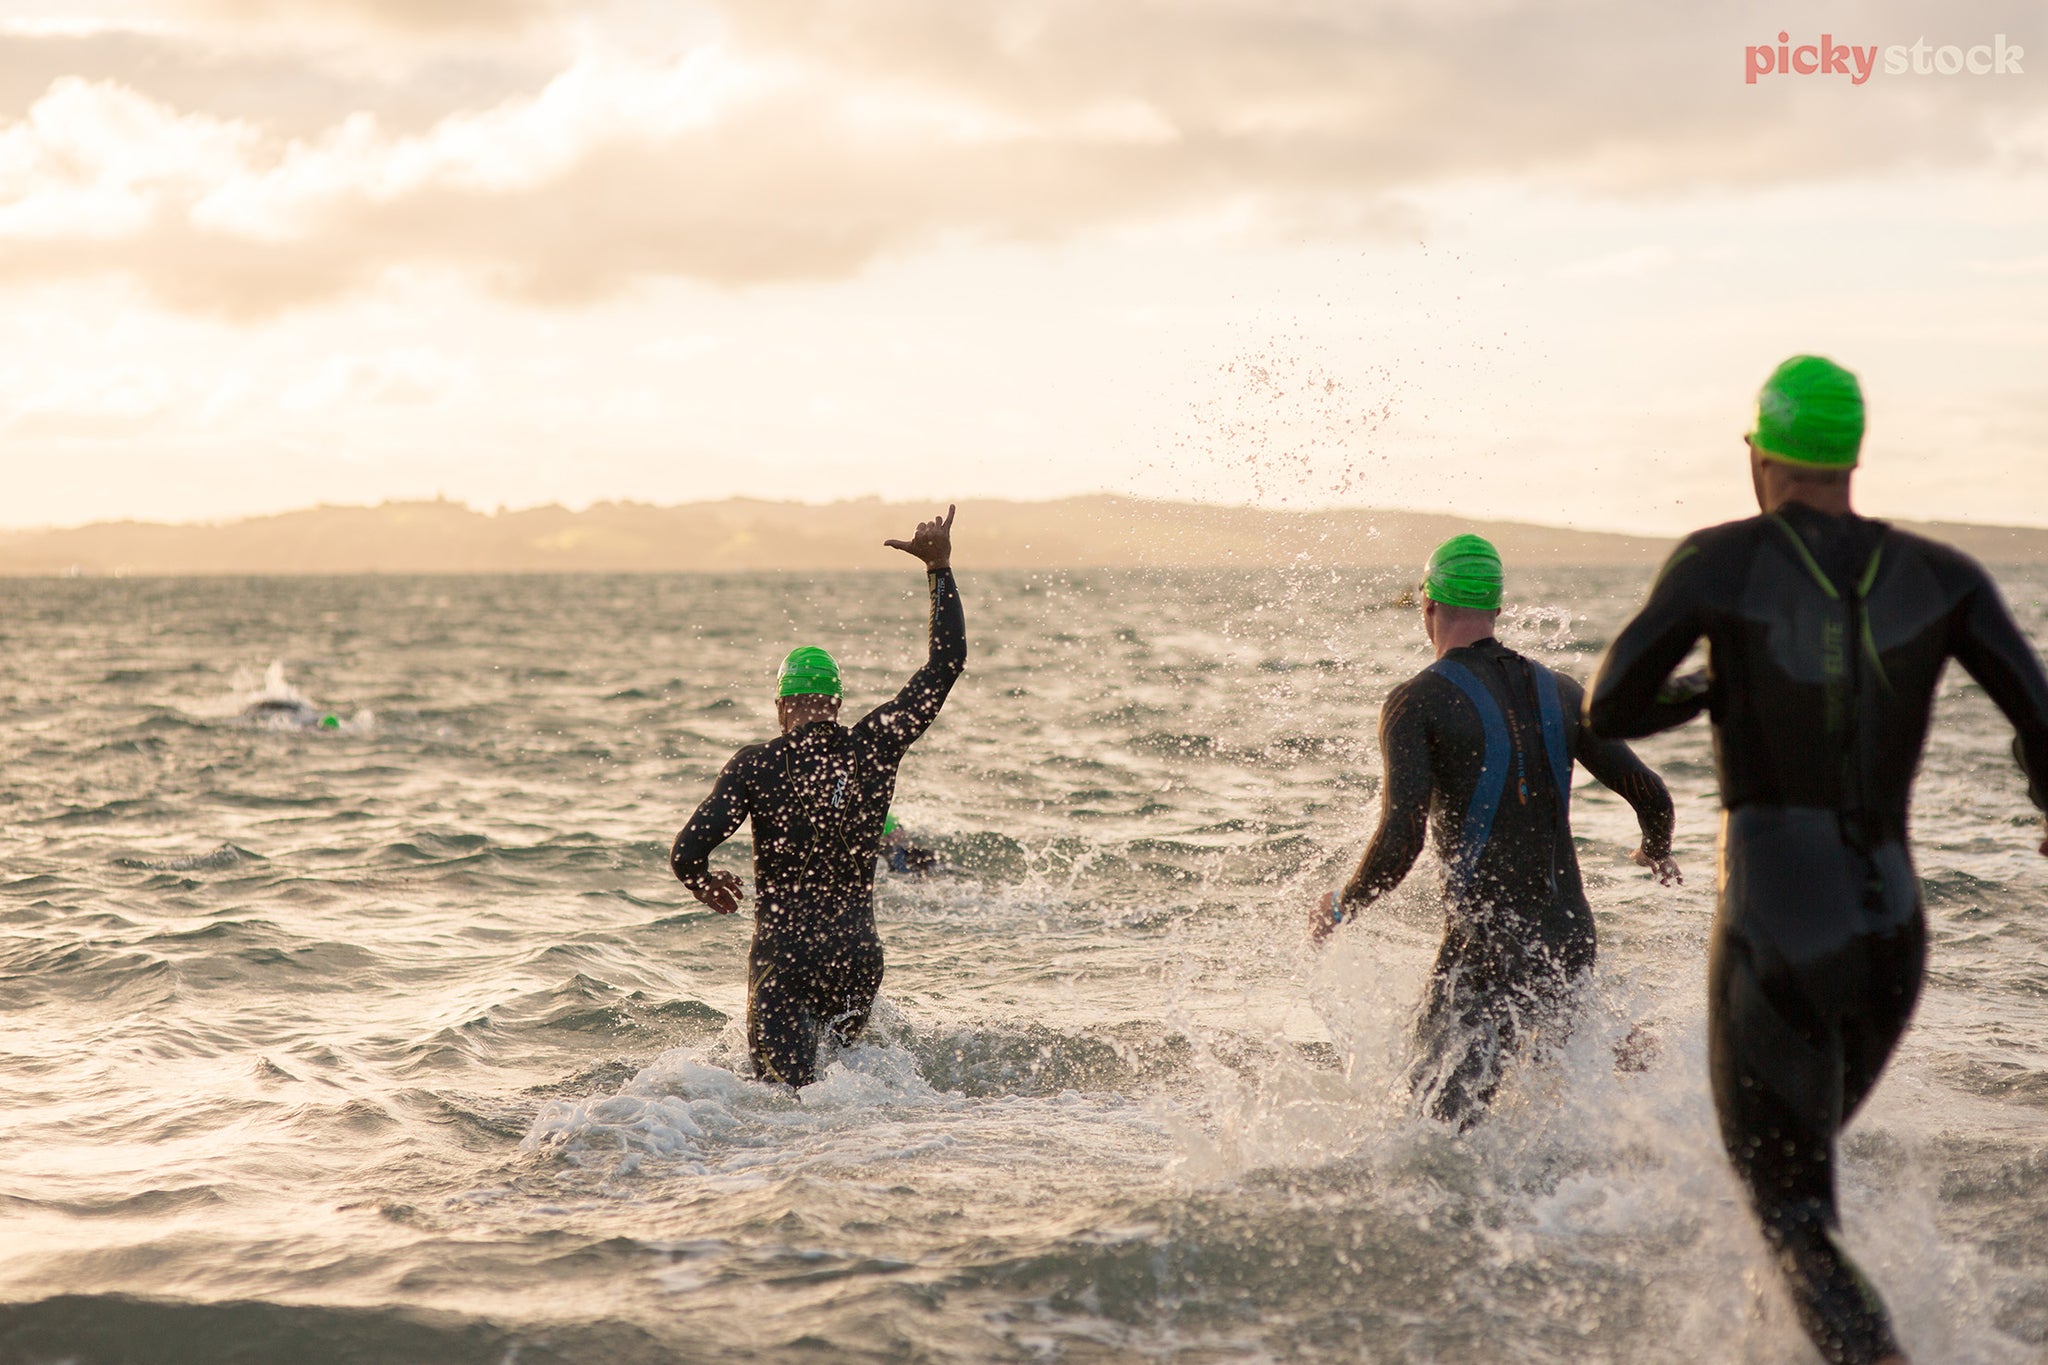 Group of ocean swimmers run into water, ready to swim. Wearing wet suits and bright green swimming caps. Sky is golden. 